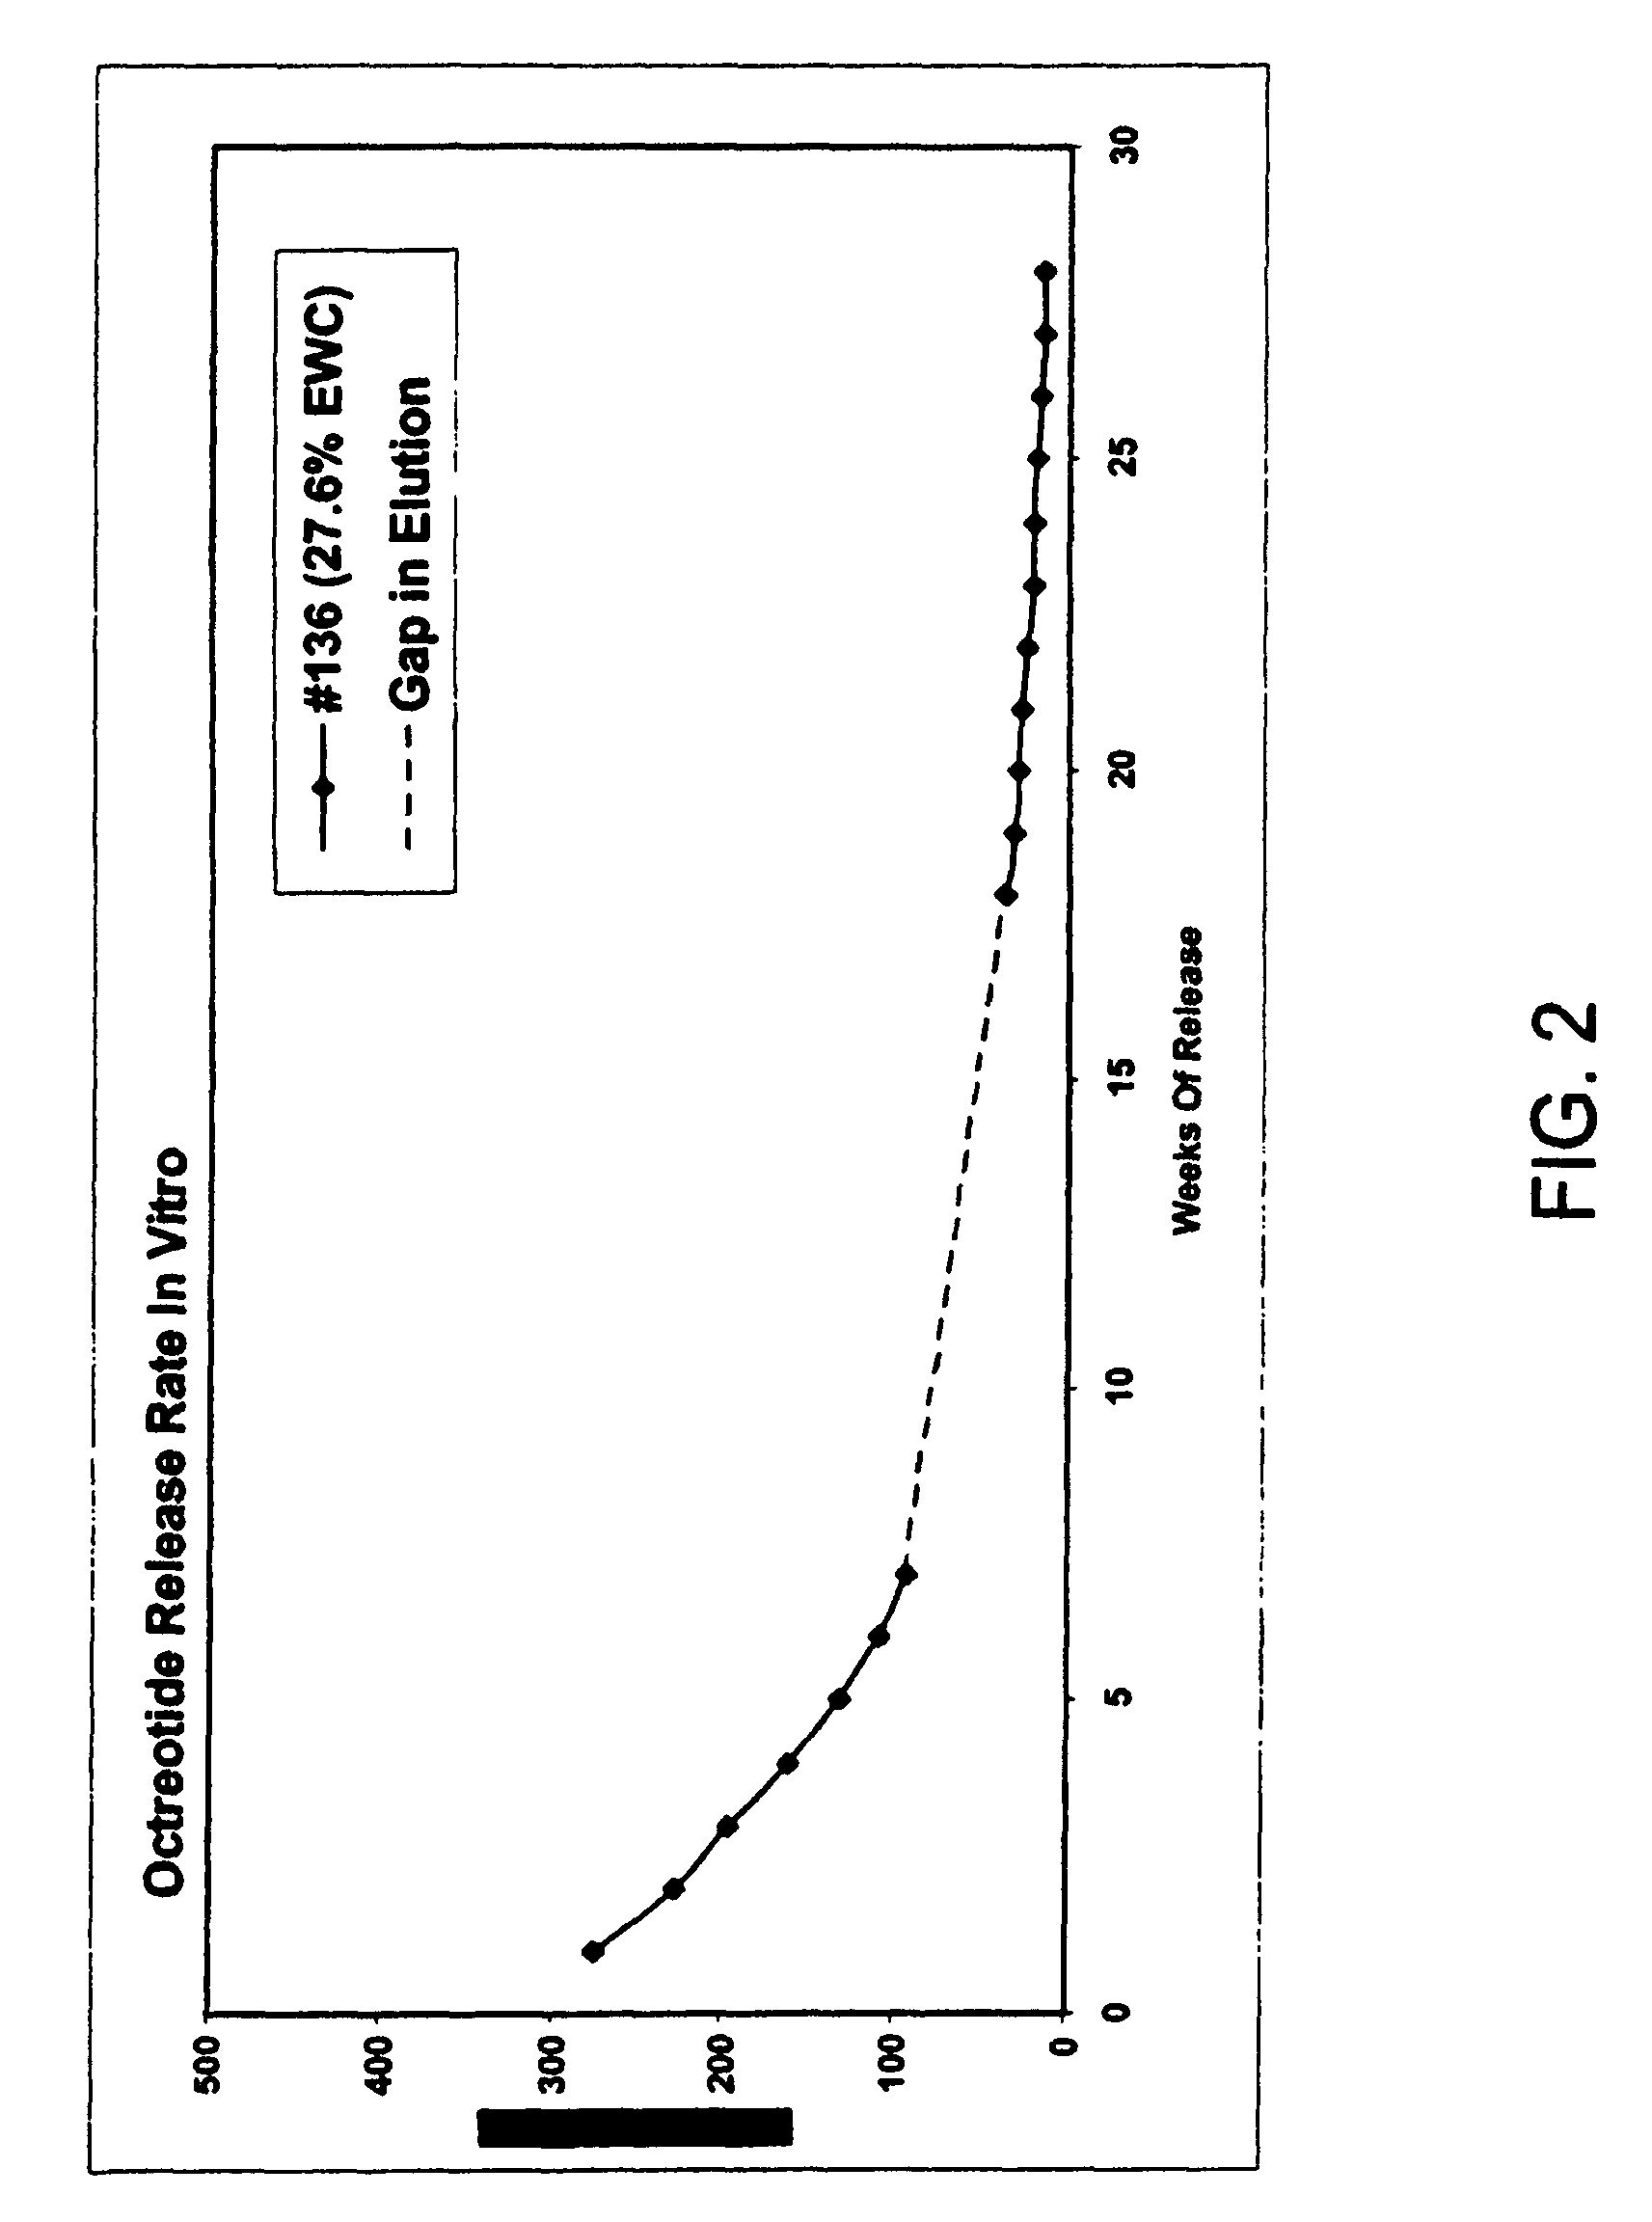 Delivery of dry formulations of octreotide